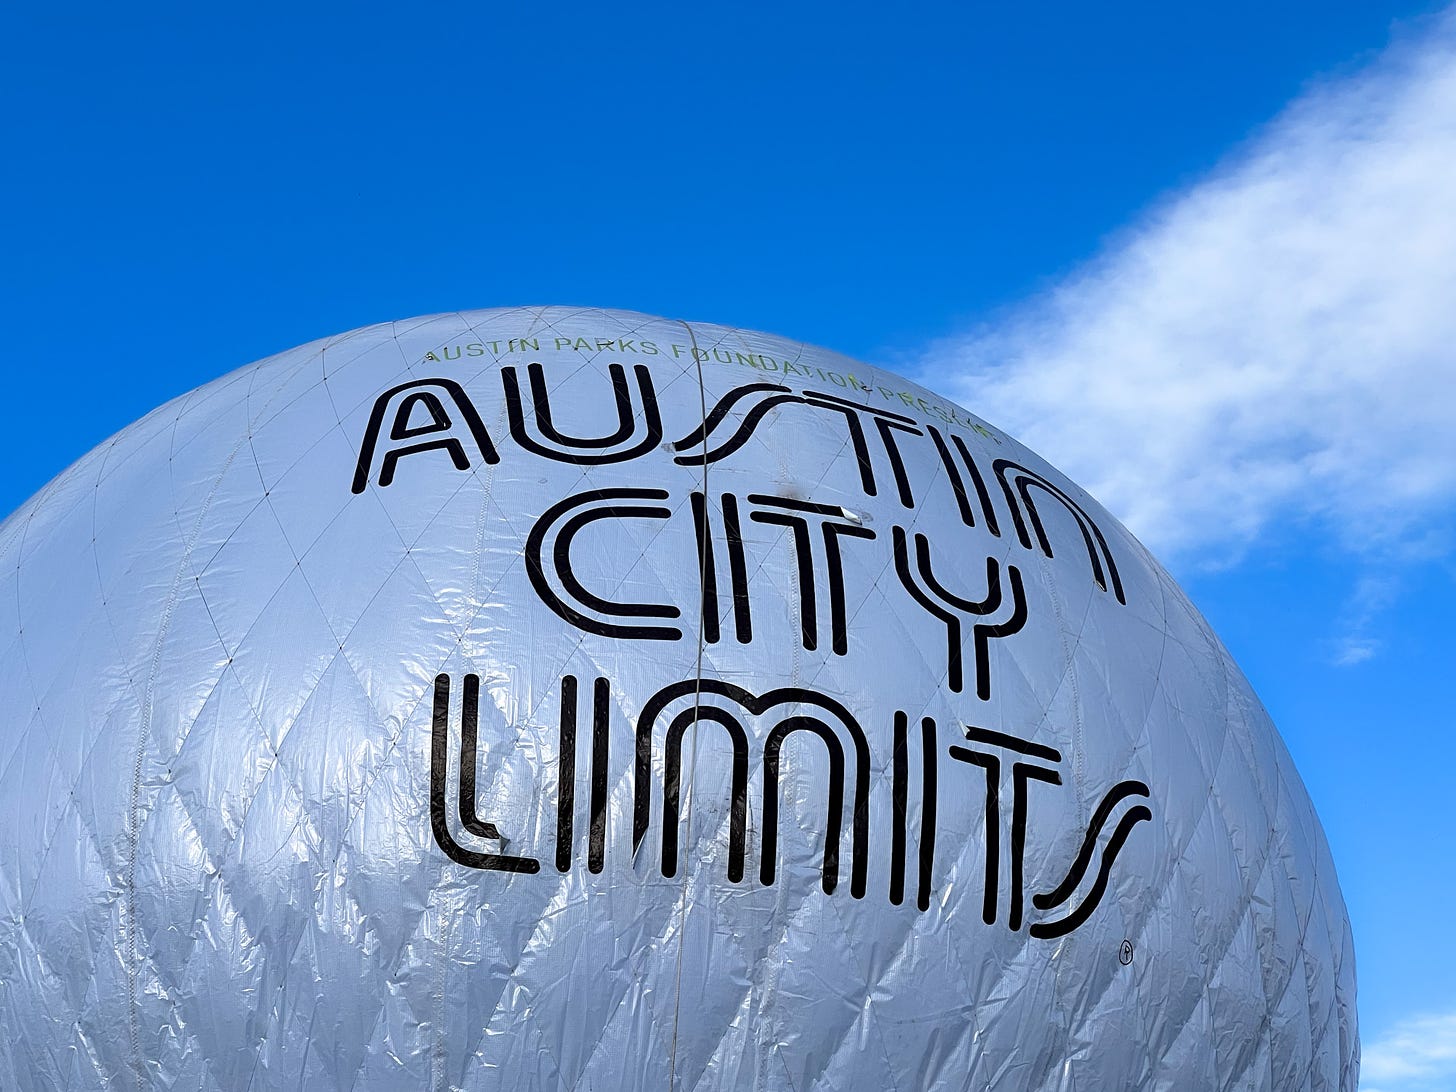 A large white mylar baloon against a blue sky with  these words in large block print: Austin City Limits